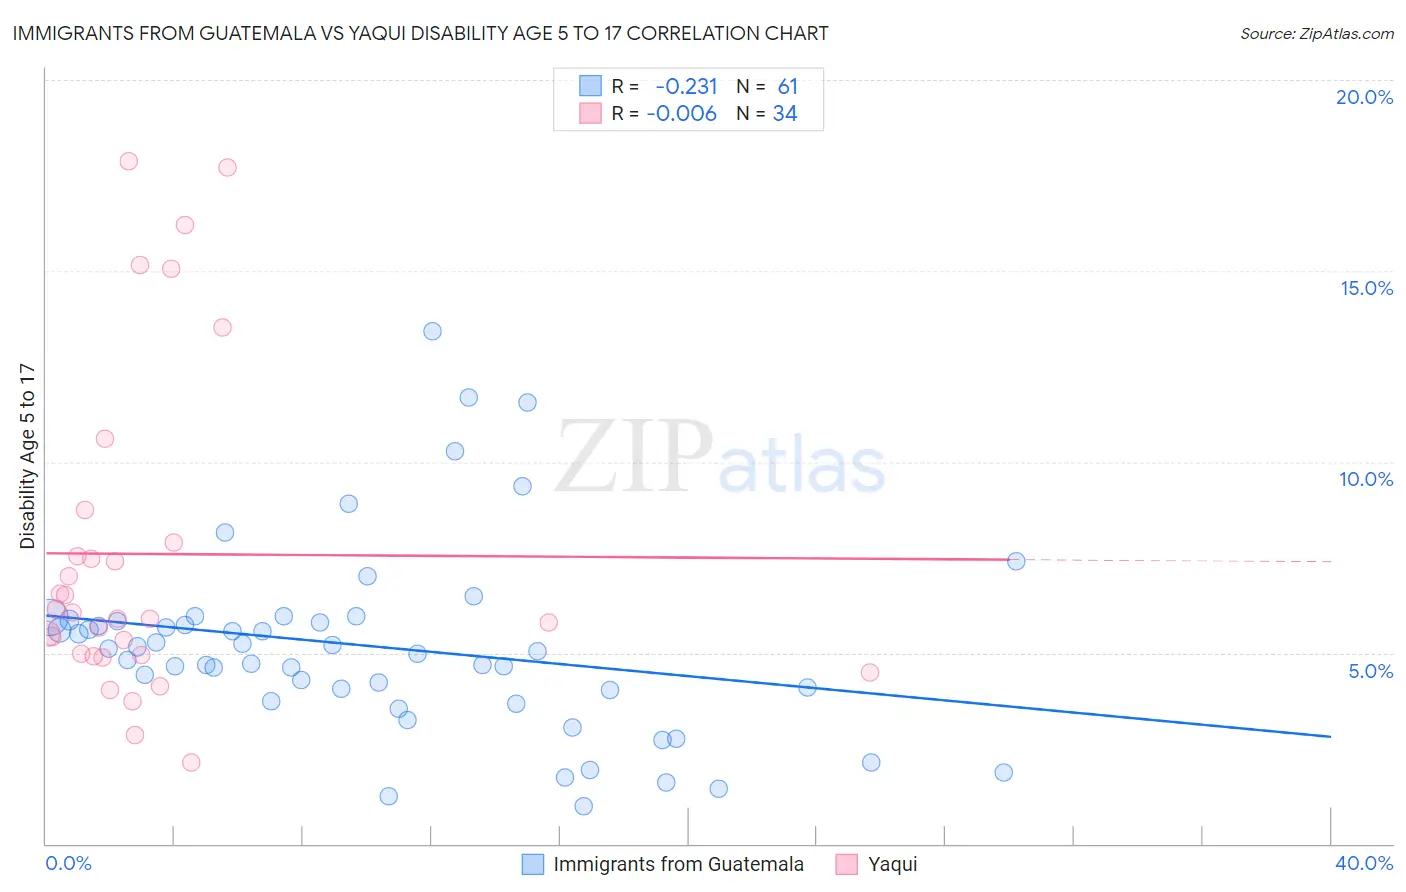 Immigrants from Guatemala vs Yaqui Disability Age 5 to 17